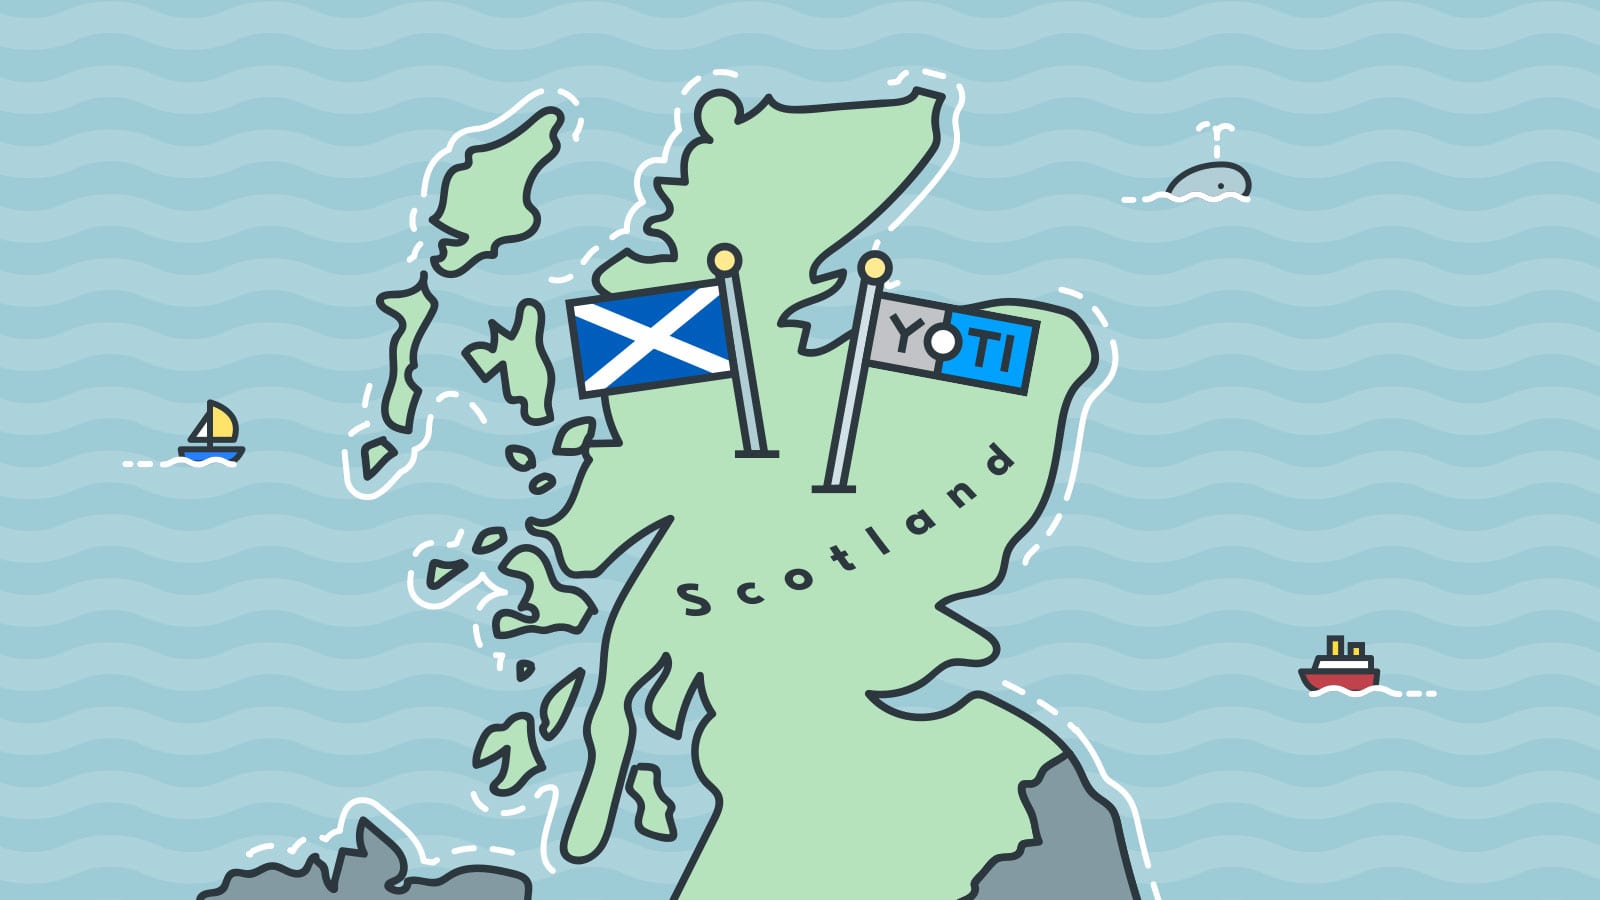 Yoti on a map of Scotland, marking the partnership with the Improvement Service